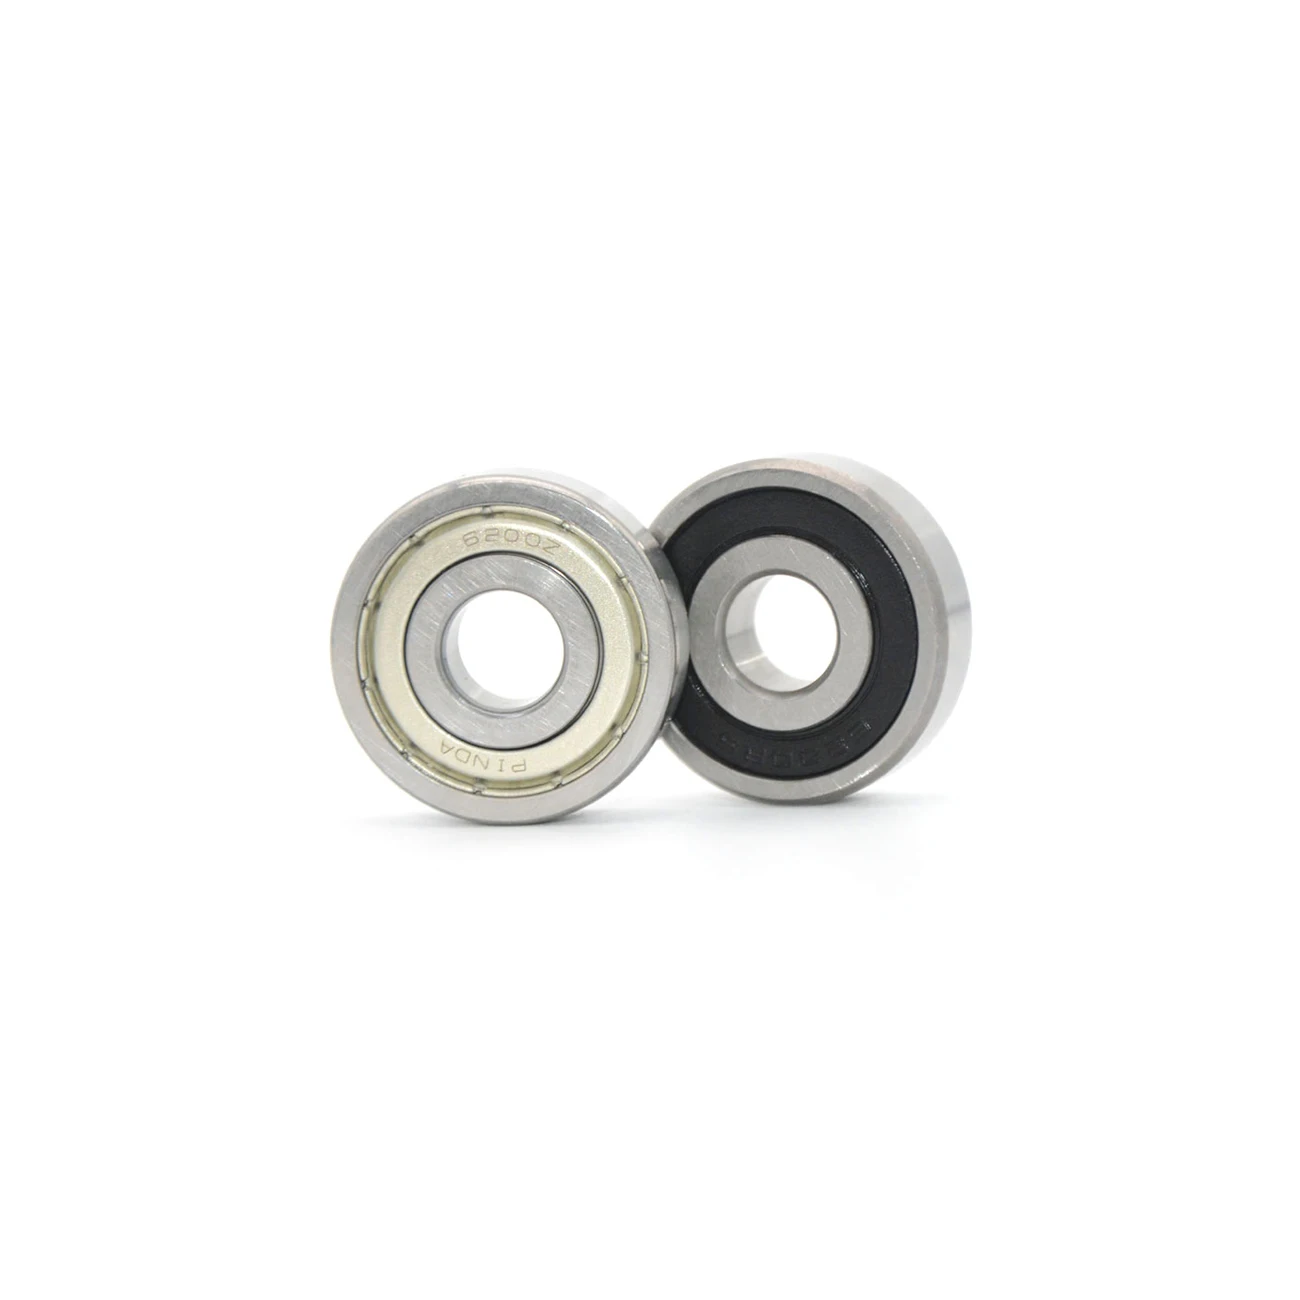 Cheap Hot Sale High Quality 6200 Deep Groove Ball Bearing Small bearings With Cheap Affordable (1600281023631)